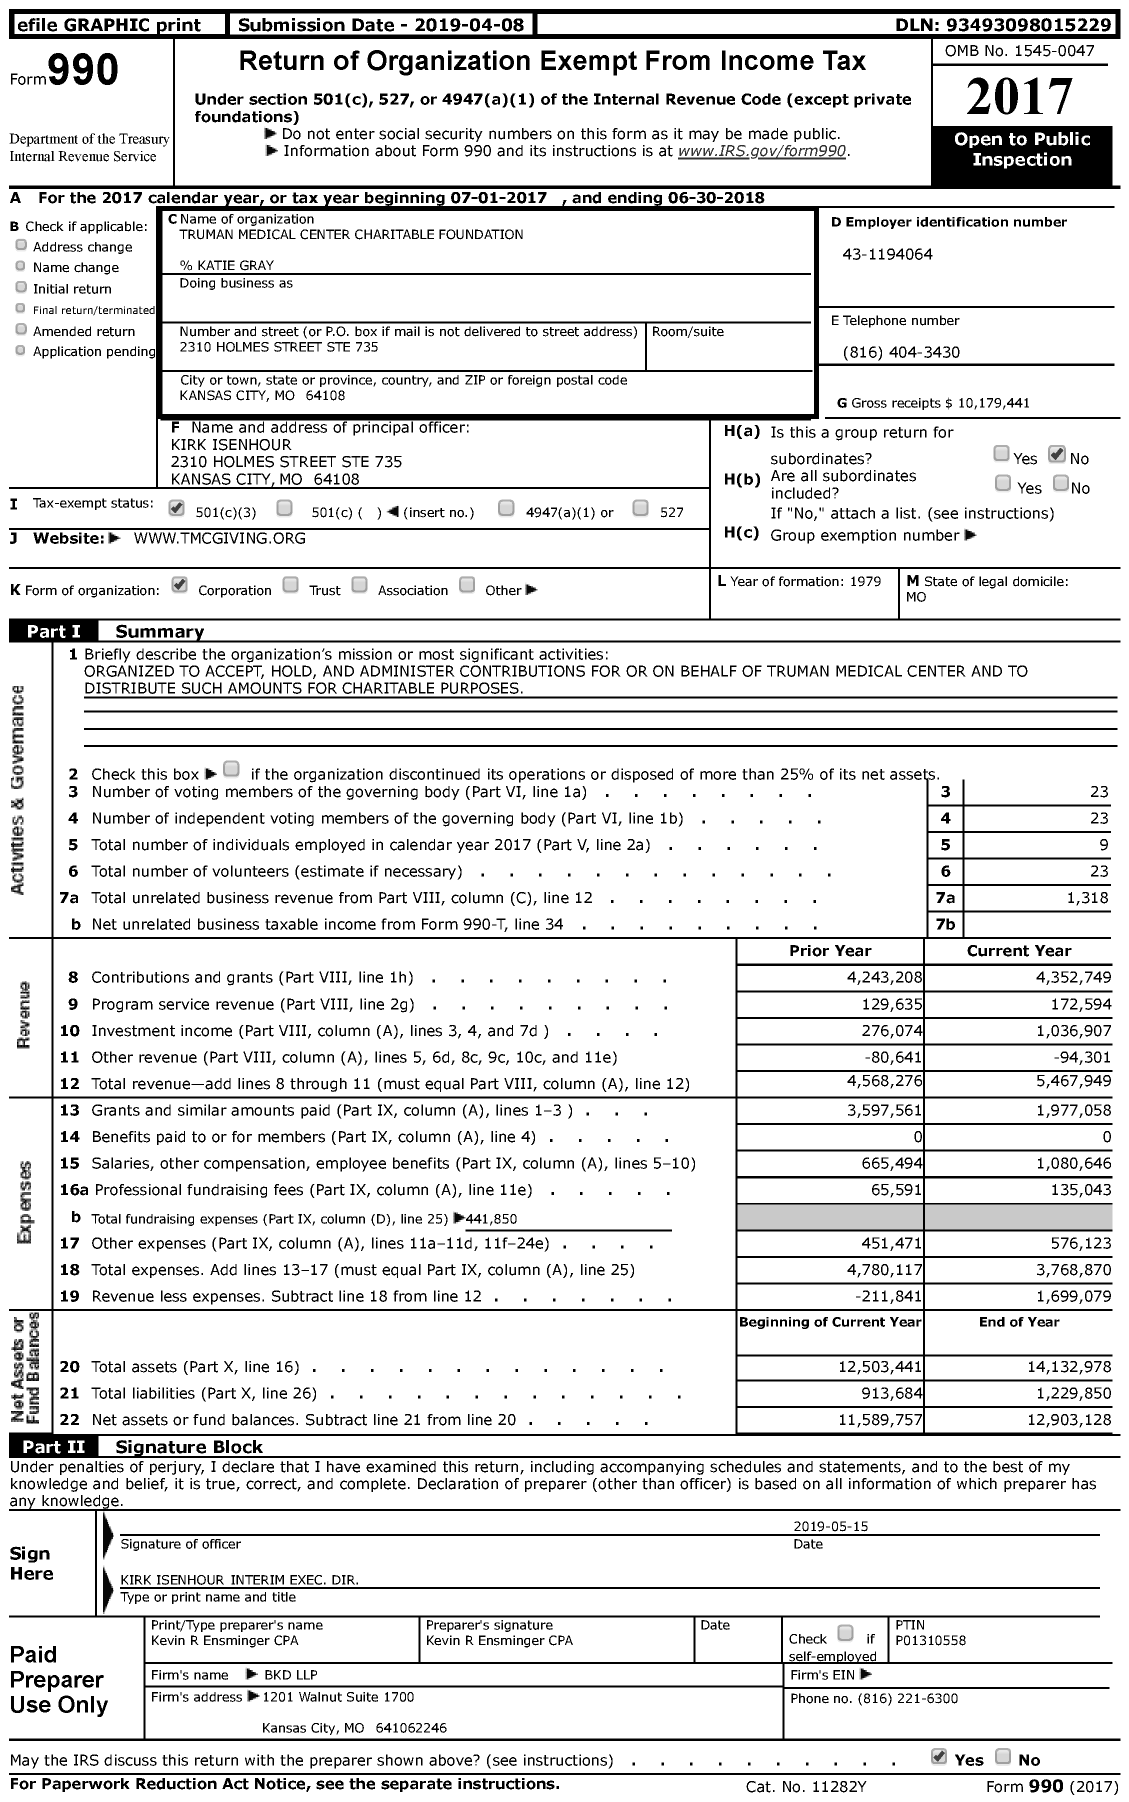 Image of first page of 2017 Form 990 for University Health Foundation / Truman Medical Center Charitable Foundation (TMC)